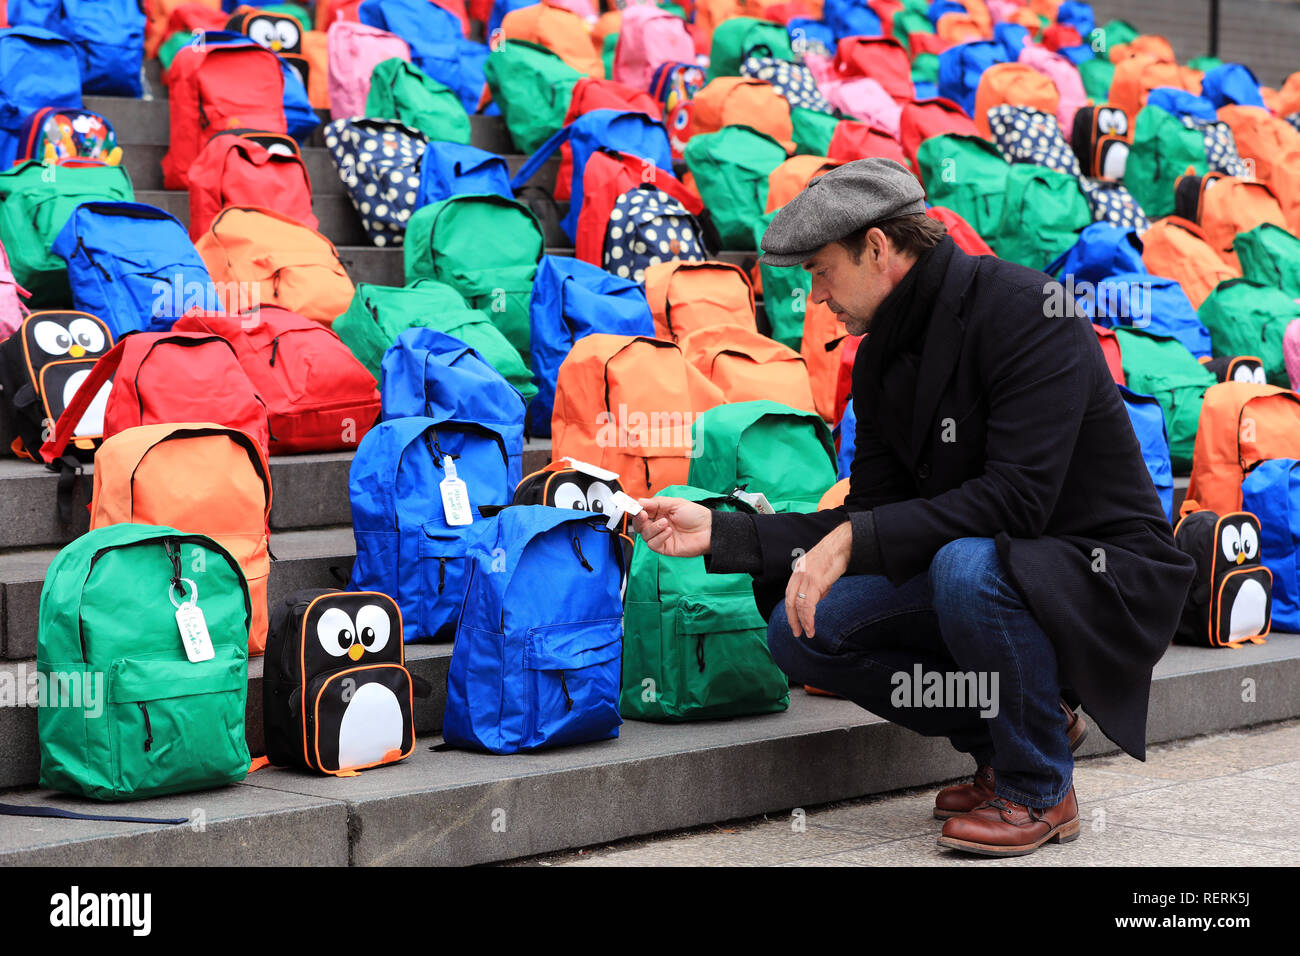 London, UK. 23rd January, 2018. Actor and WaterAid Ambassador Dougray Scott looks at the 800 schoolbags laid by WaterAid on the steps of St Paul’s Cathedral in a moving tribute to the number of children who die every day from dirty water, never reaching their fifth birthday or first day at school. WaterAid placed 800 children’s schoolbags on the famous steps of St Paul’s Cathedral today as a stark reminder of the number of young children’s lives lost every single day due to dirty water and poor sanitation.   Credit: Oliver Dixon/Alamy Live News Stock Photo